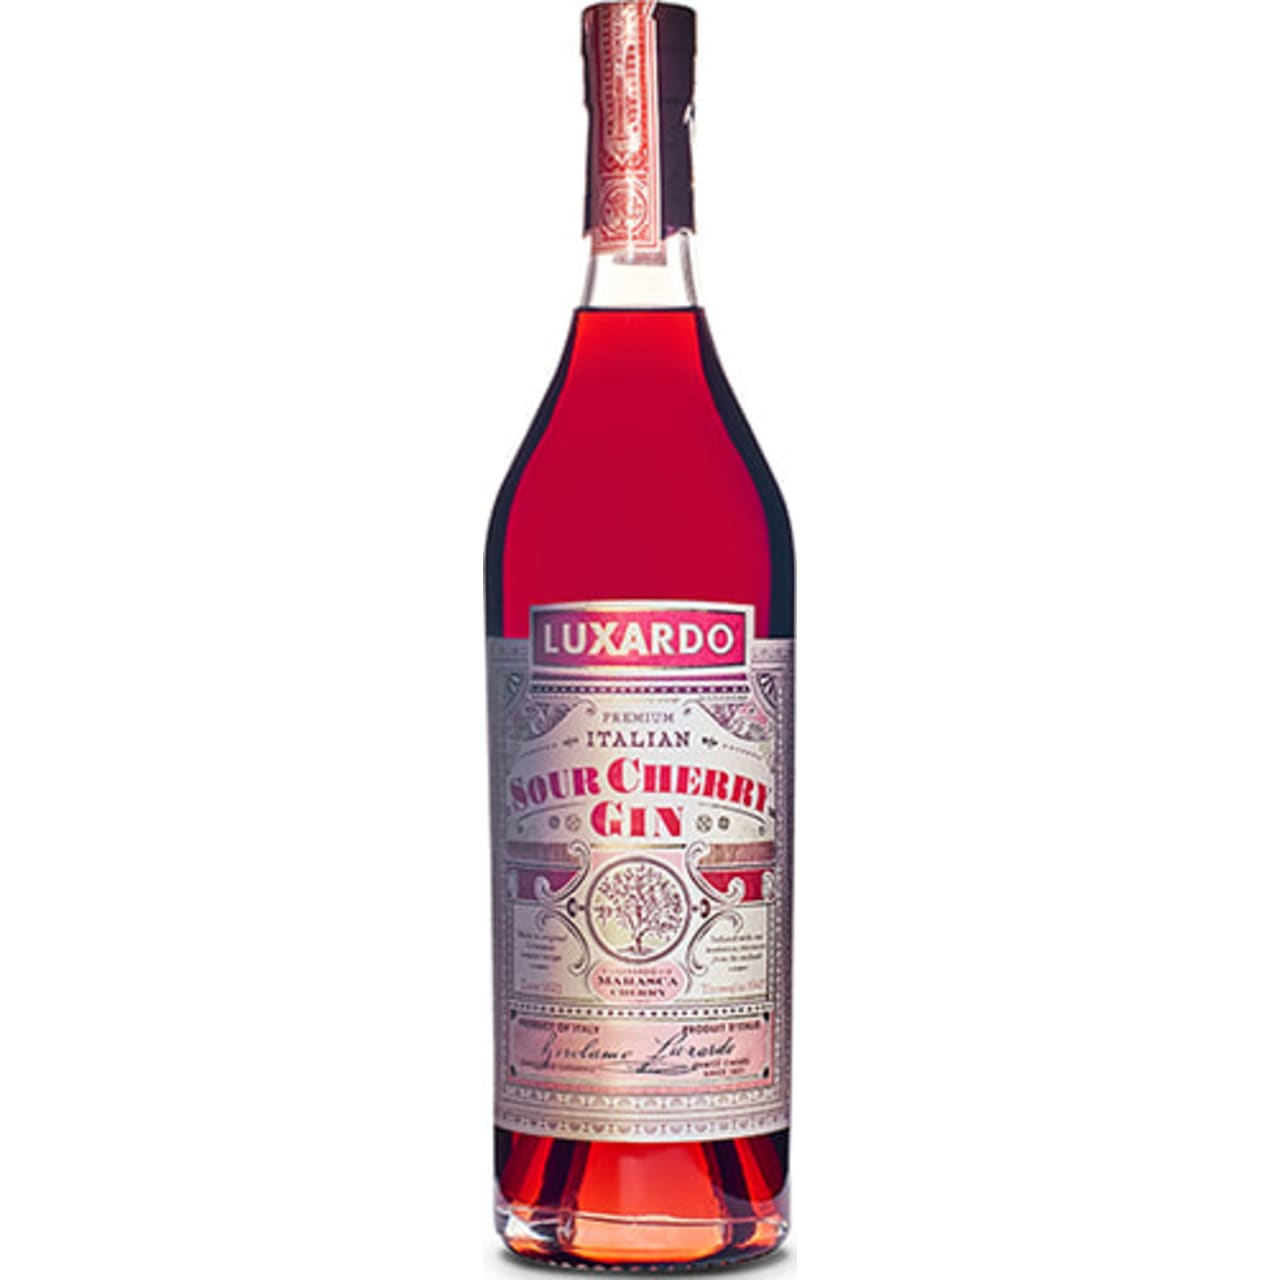 Italian liqueur legends Luxardo created this Sour Cherry Gin by infusing its famed Marasca cherry juice with its London Dry Gin distillate to create a fabulously flavoured gin that works in a number of classic cocktails.